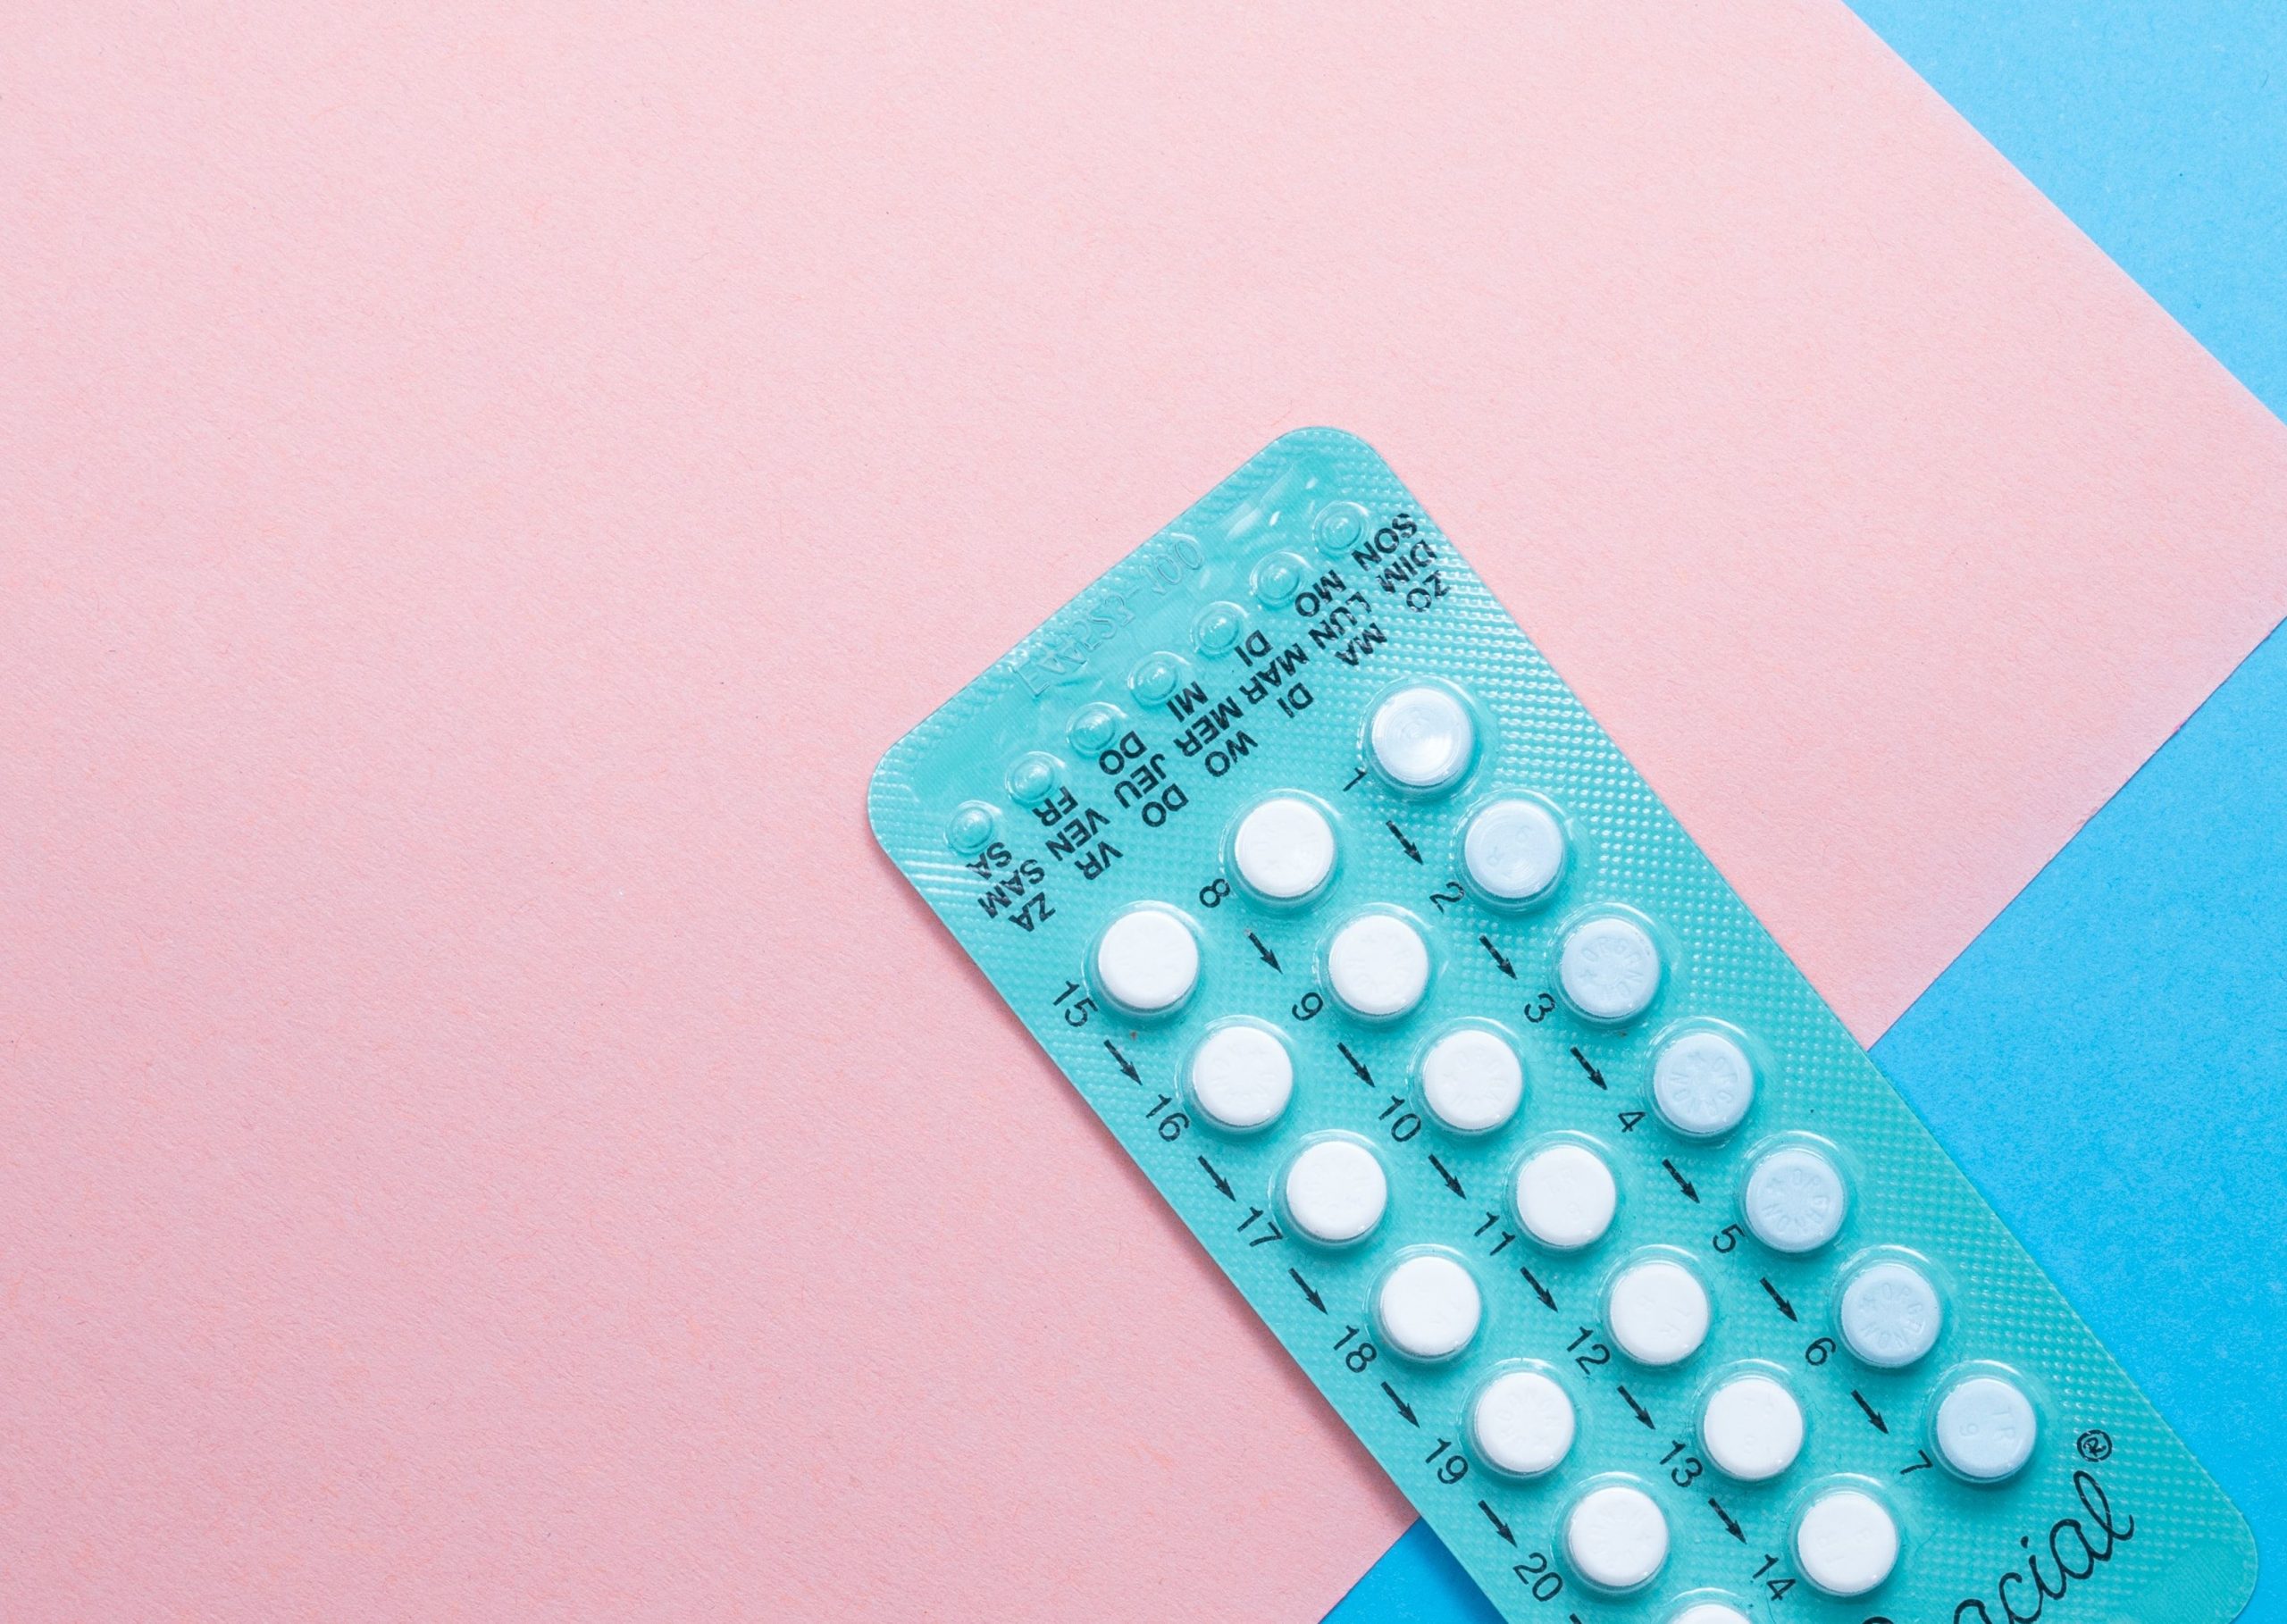 Amazon limits on contraceptive pills purchases